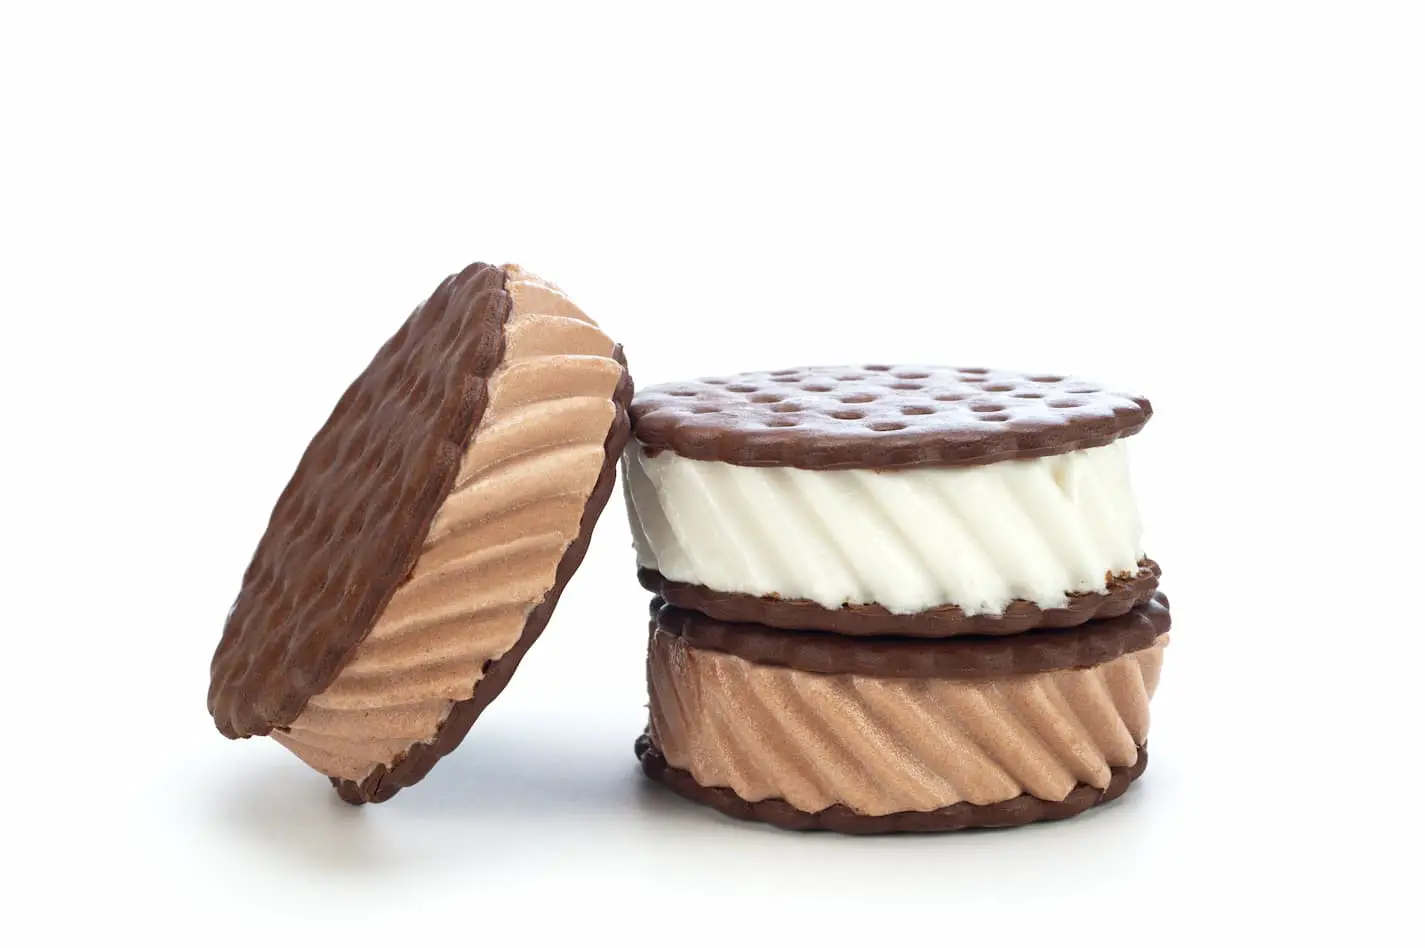 an image of ice cream sandwiches before being freeze-dried